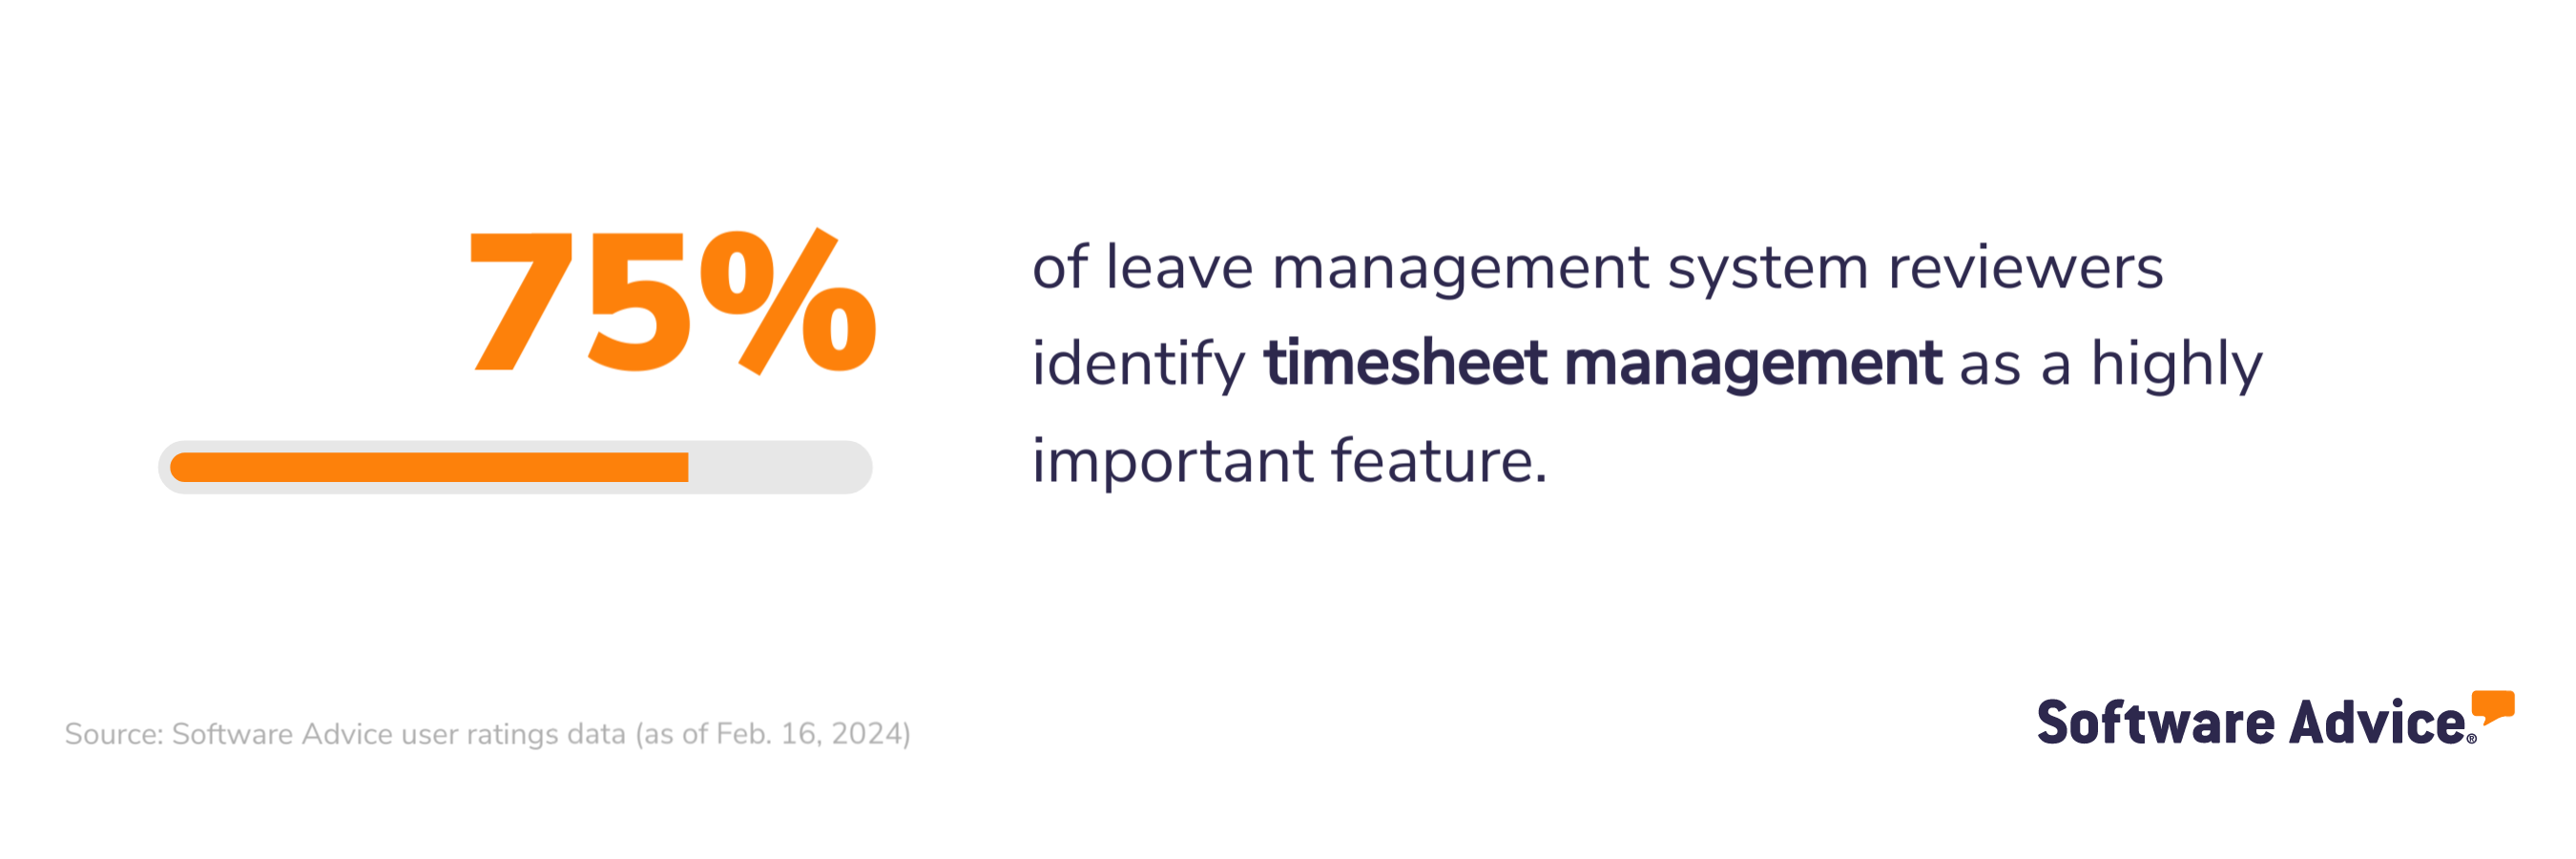 75% of leave management system reviewers identify timesheet management as a highly important feature.